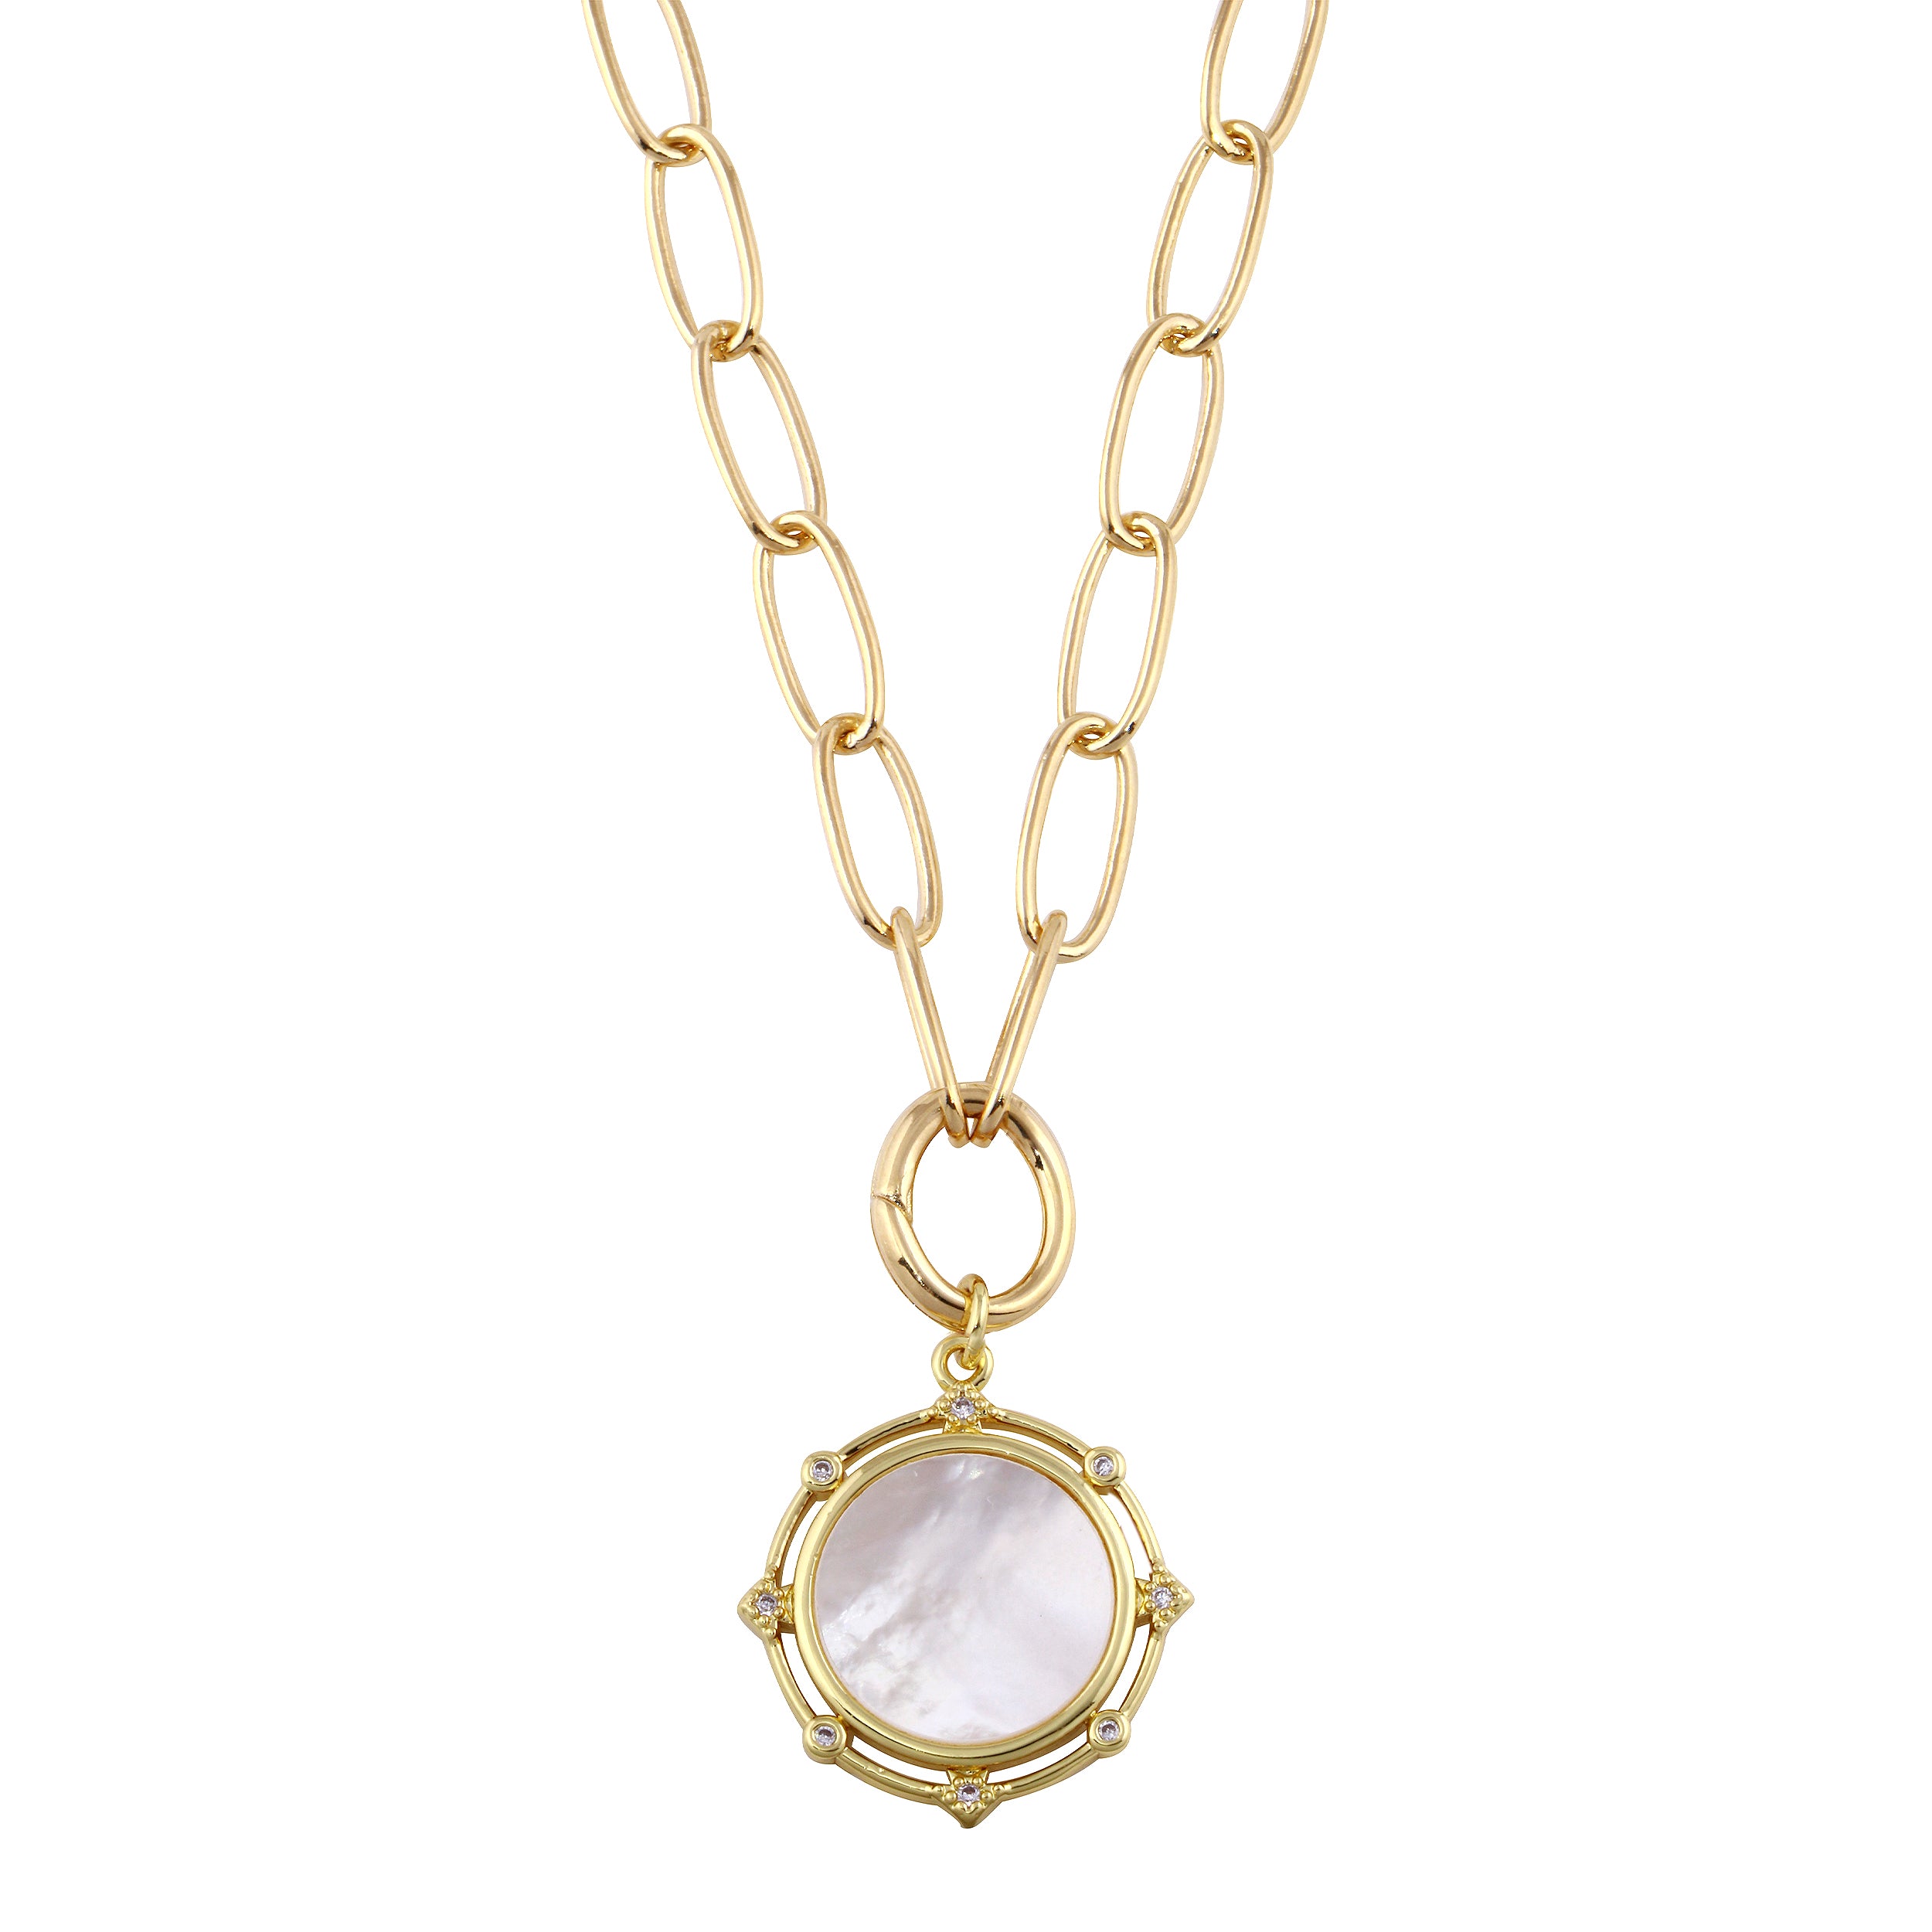 Mother of Pearl and CZ Gold-filled Pendant Necklace-Necklaces-Ashley Schenkein Jewelry Design